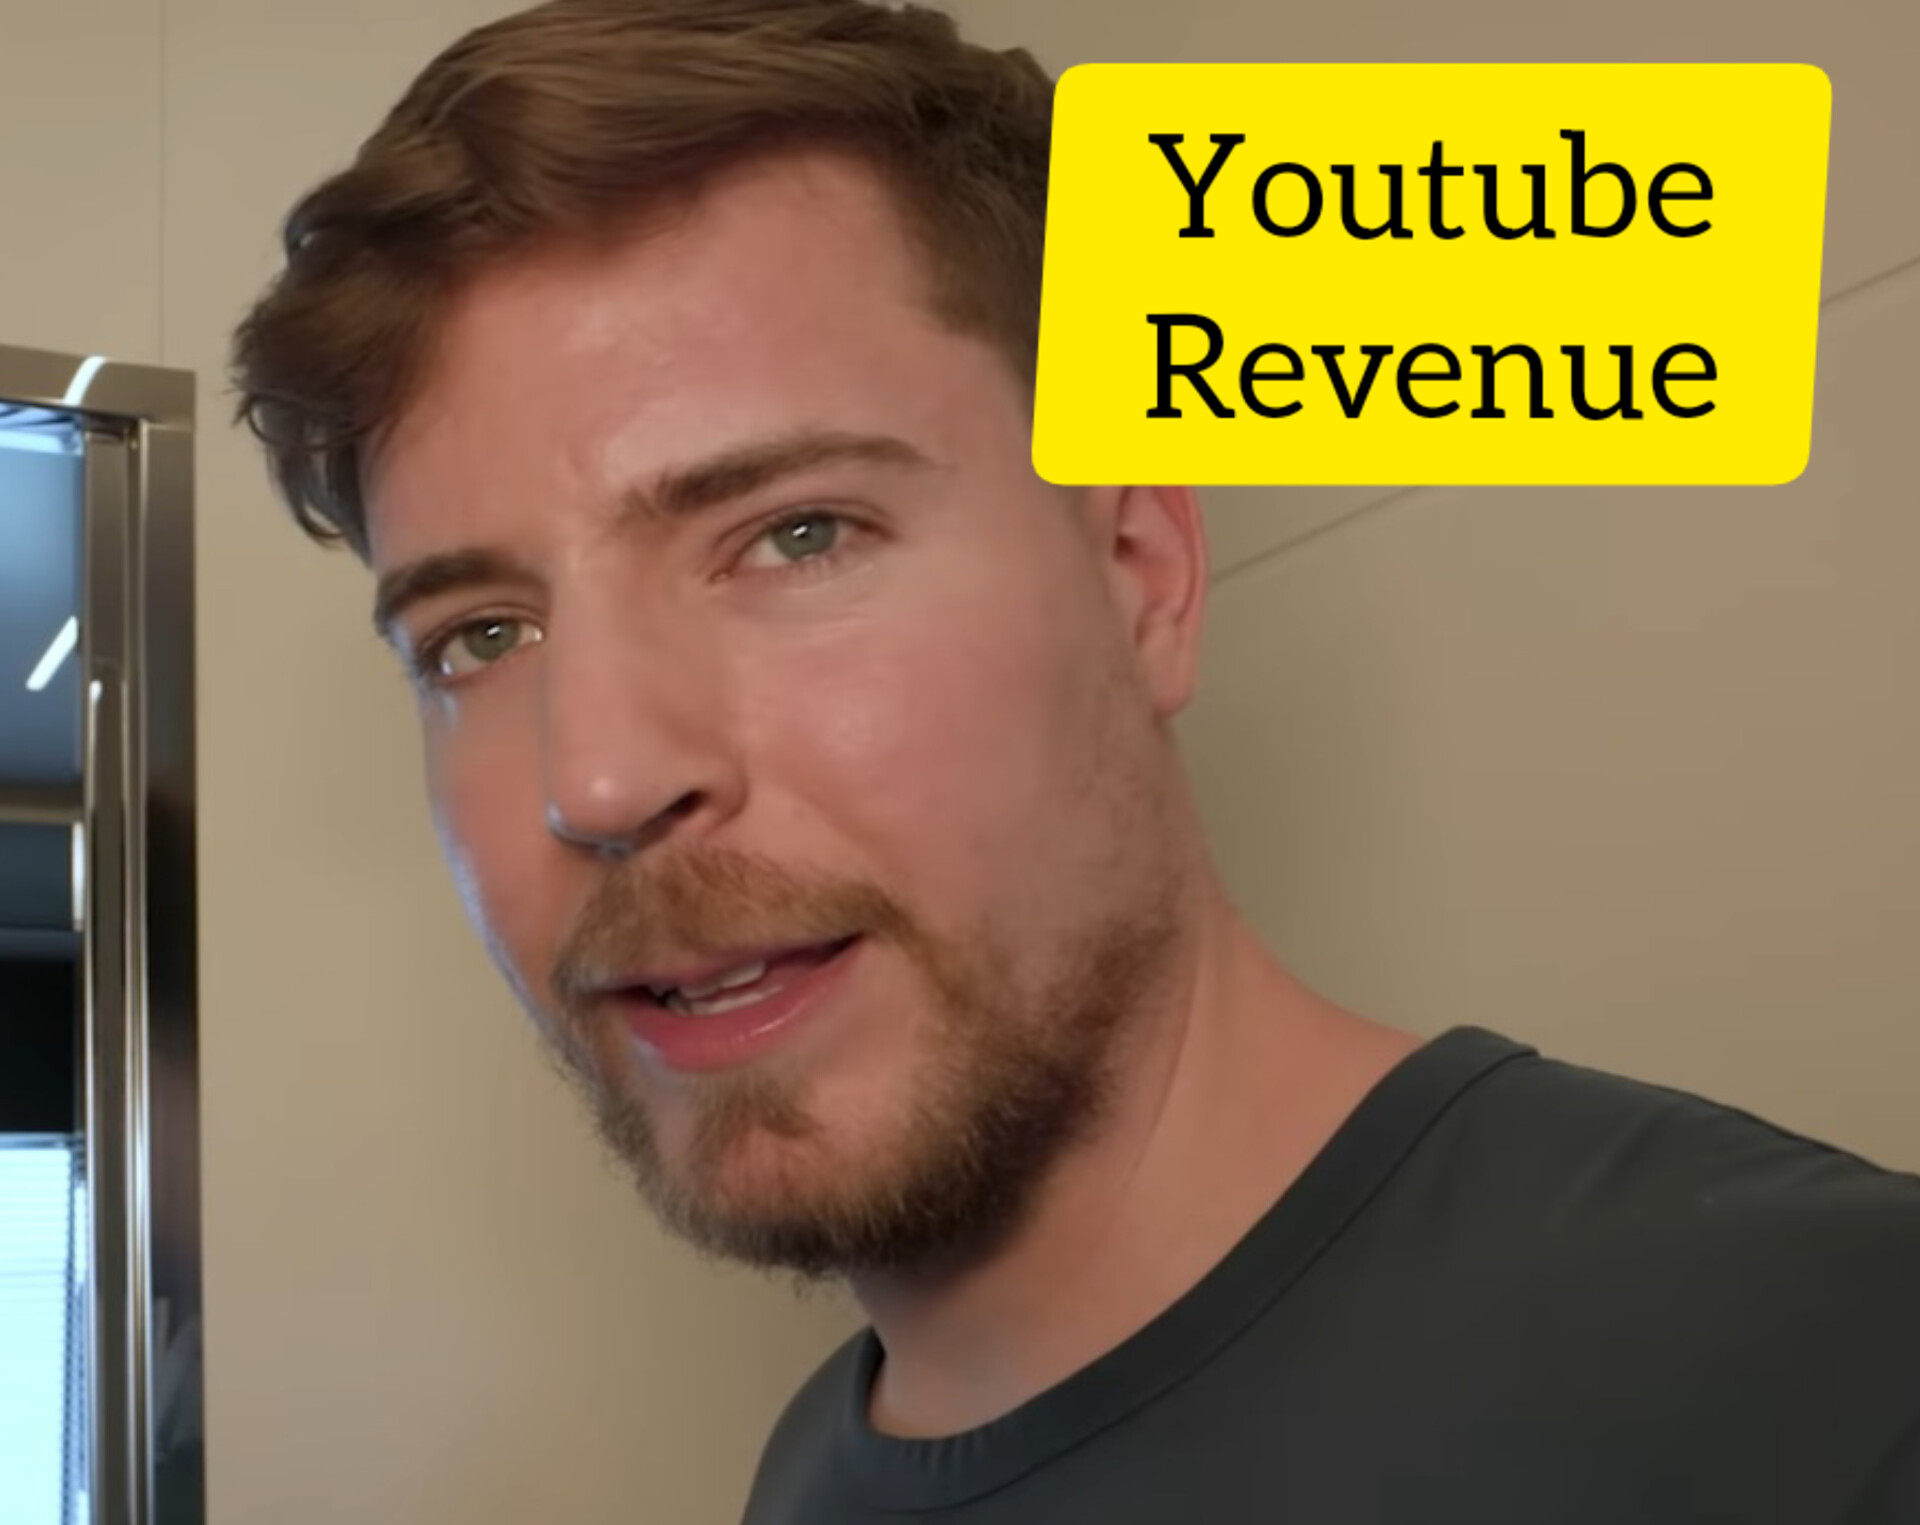 MrBeast Reveals Shocking Earnings from YouTube Revenue on His Latest High-Budget Video